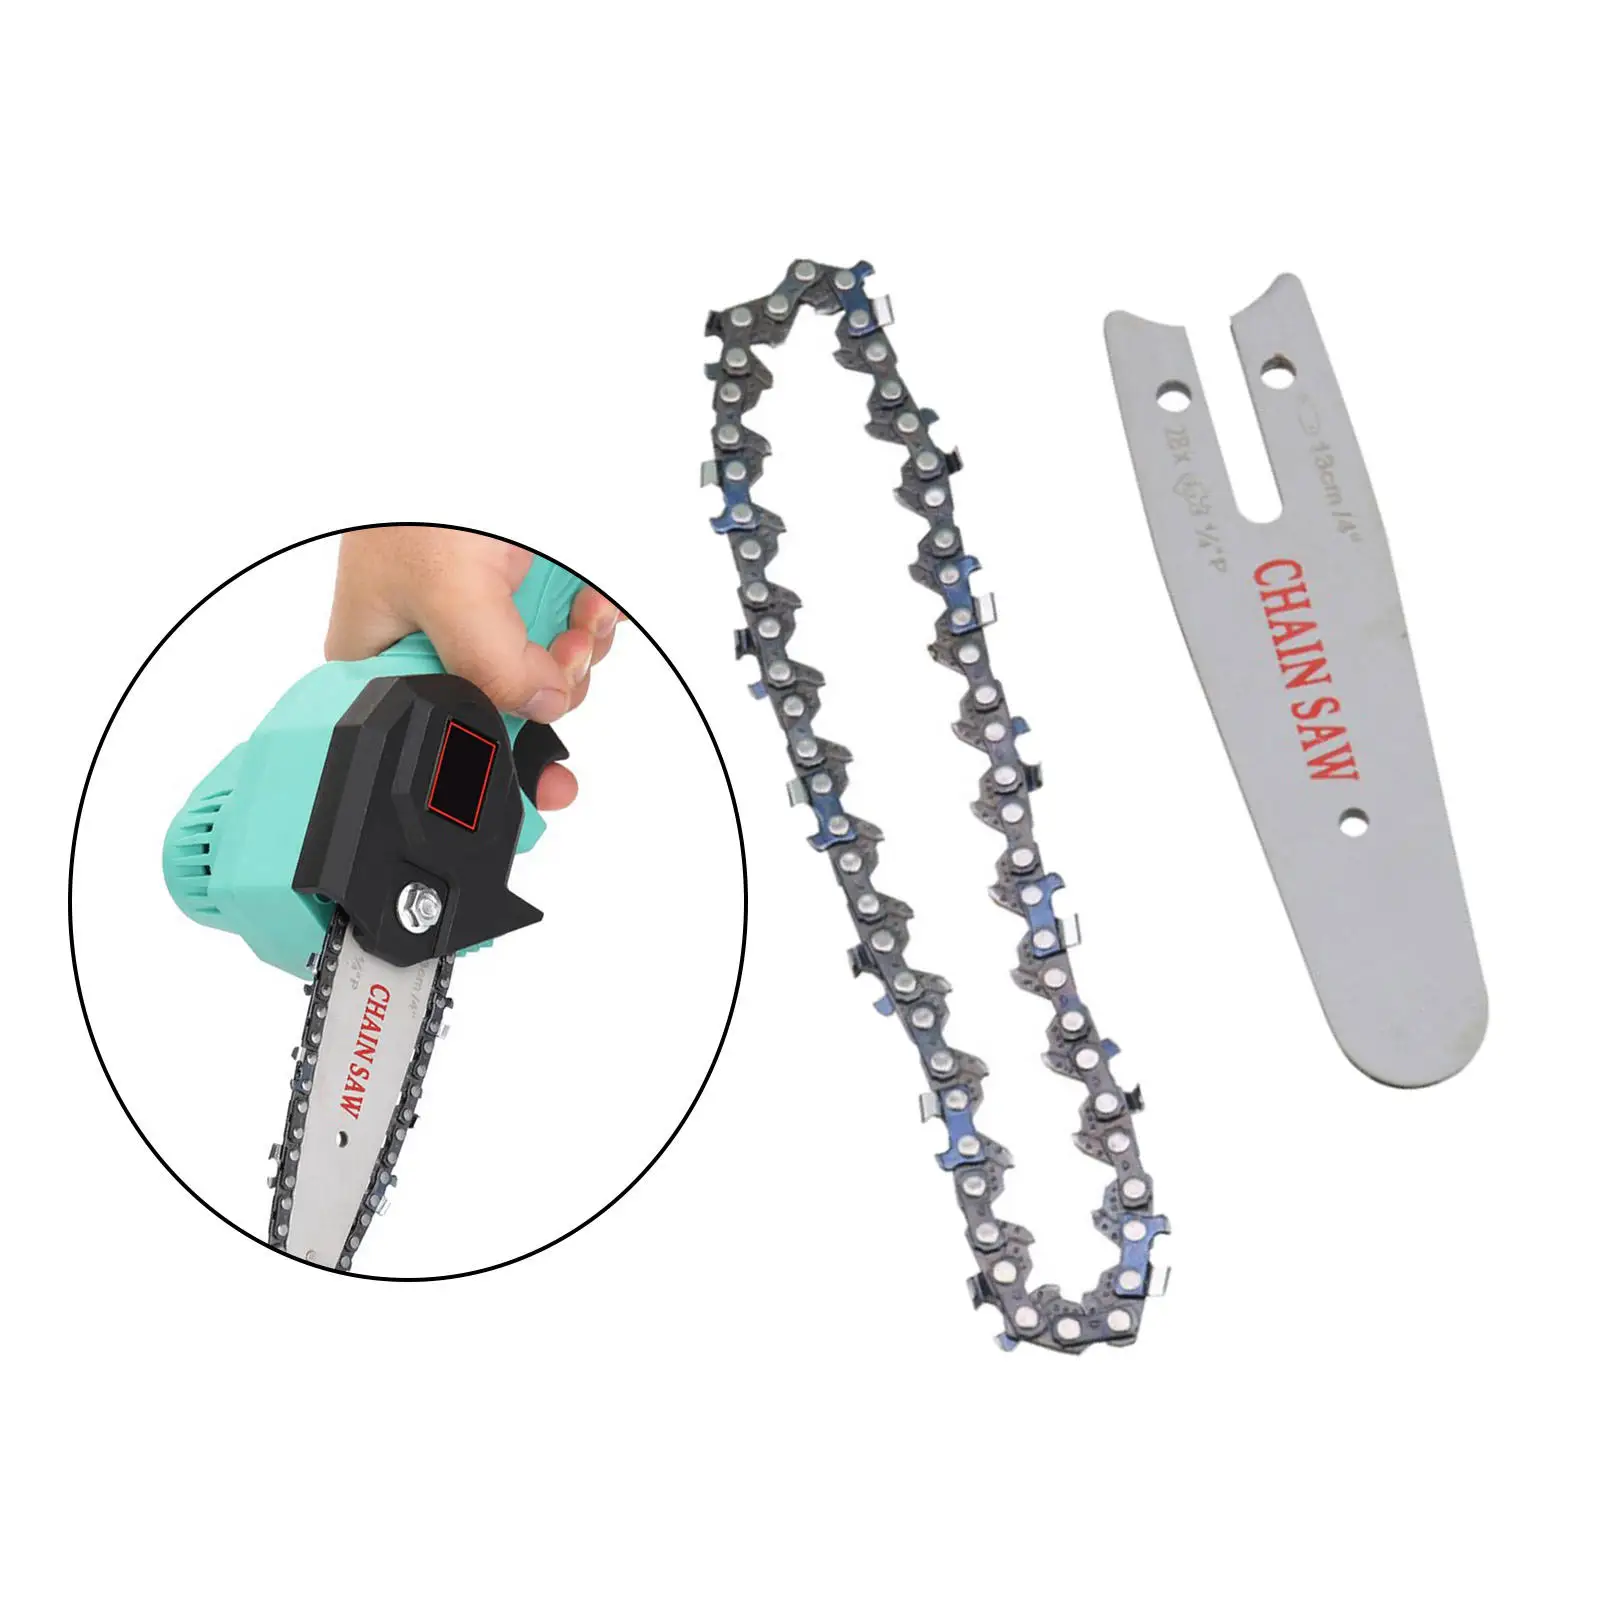 Manganese Steel Chainsaw Parts 4 inch Durable Mini Electronic Chainsaw 2 Pcs Chain Accessories for Outdoor